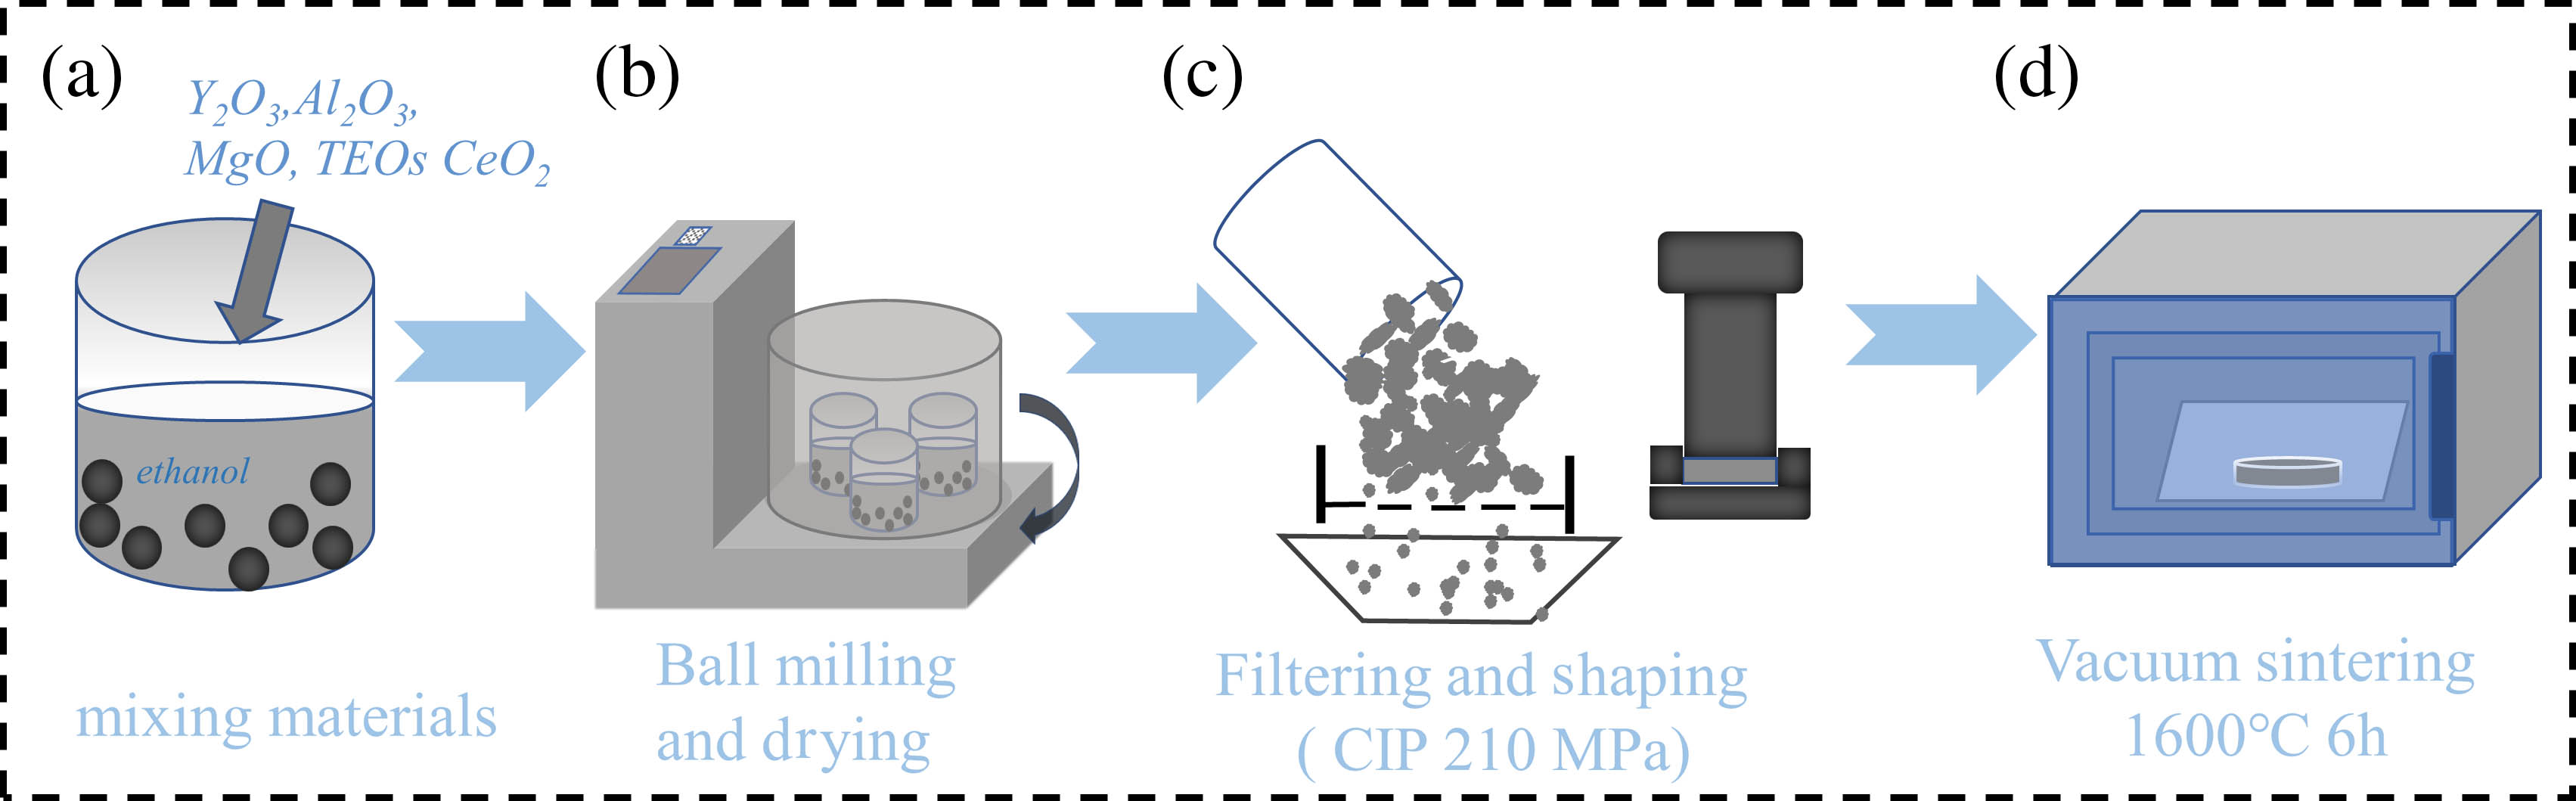 Preparation flow chart of fluorescent ceramics. (a) Mixing and (b) ball milling and drying of raw materials, (c) filtering and shaping of samples, and (d) vacuum sintering of ceramics.